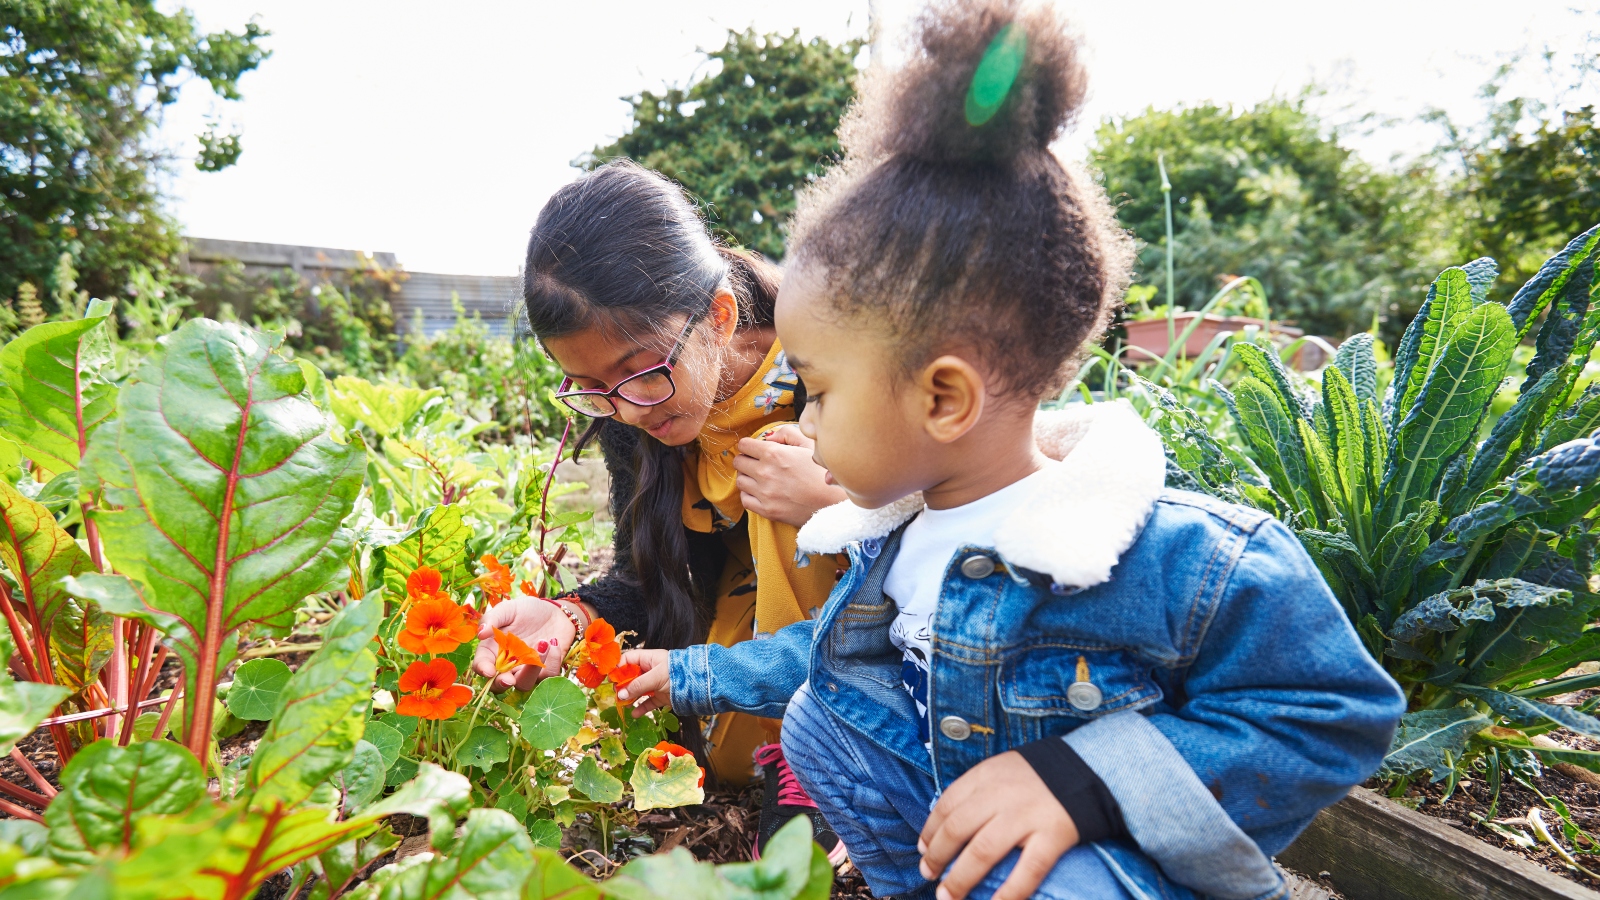 Community gardens contribute to healthy living.